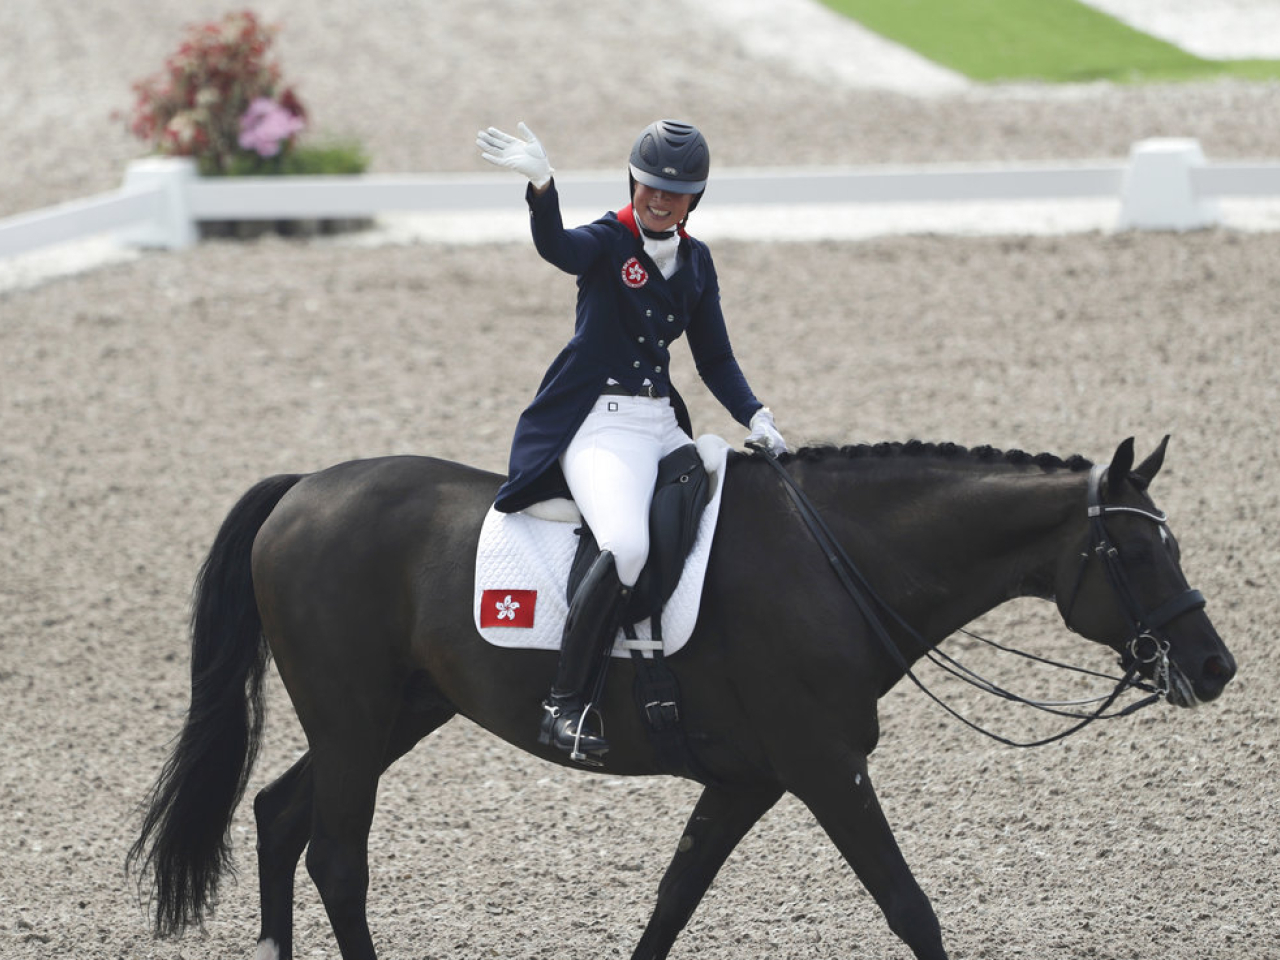 HK equestrians aiming to ride high at Asian Games